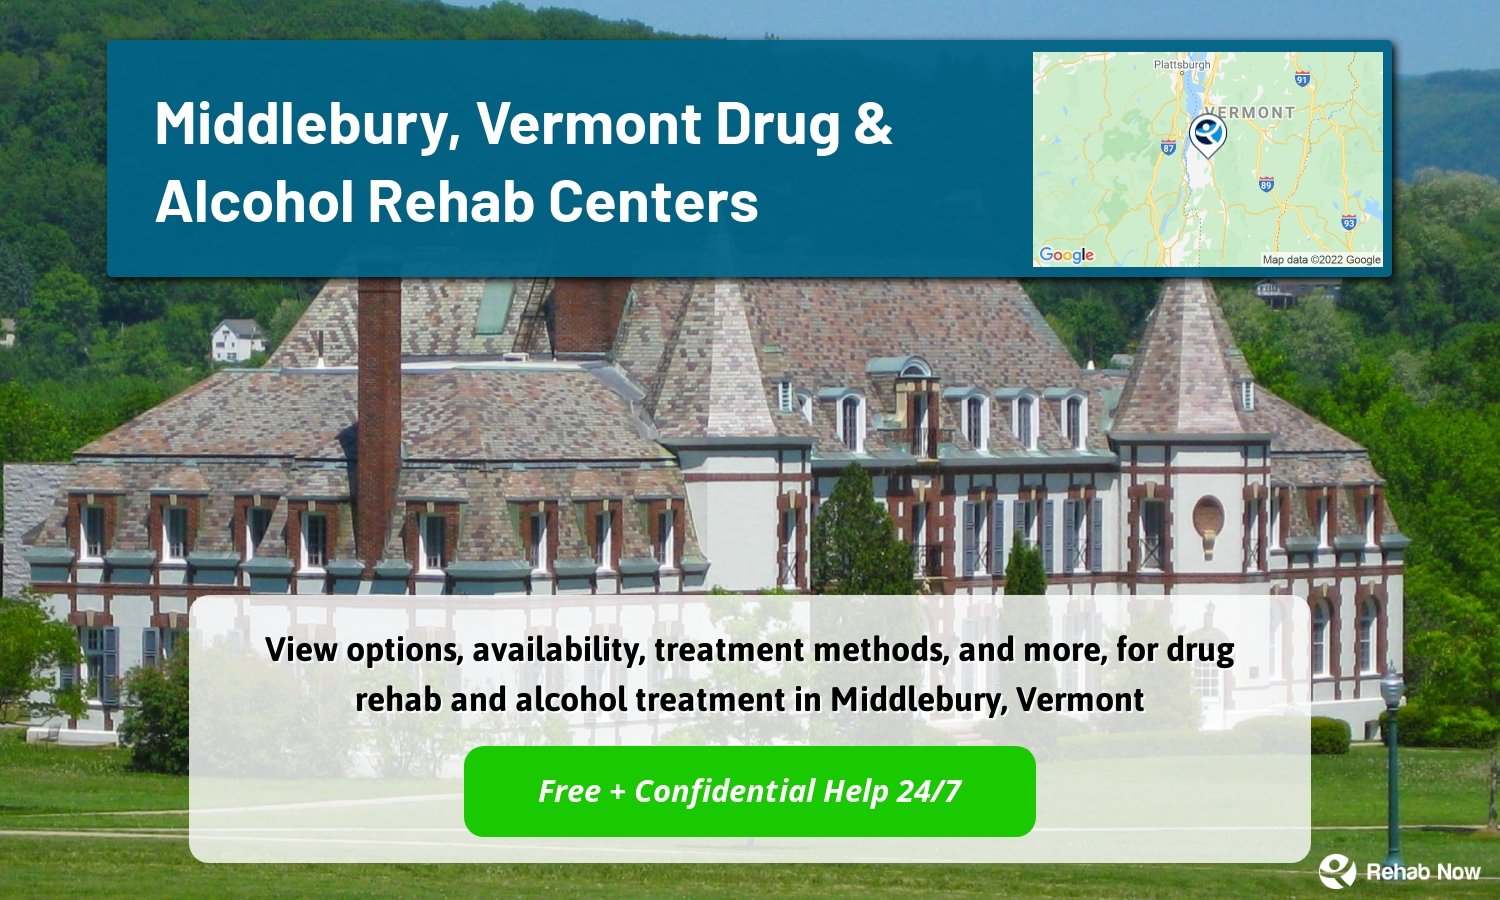 View options, availability, treatment methods, and more, for drug rehab and alcohol treatment in Middlebury, Vermont